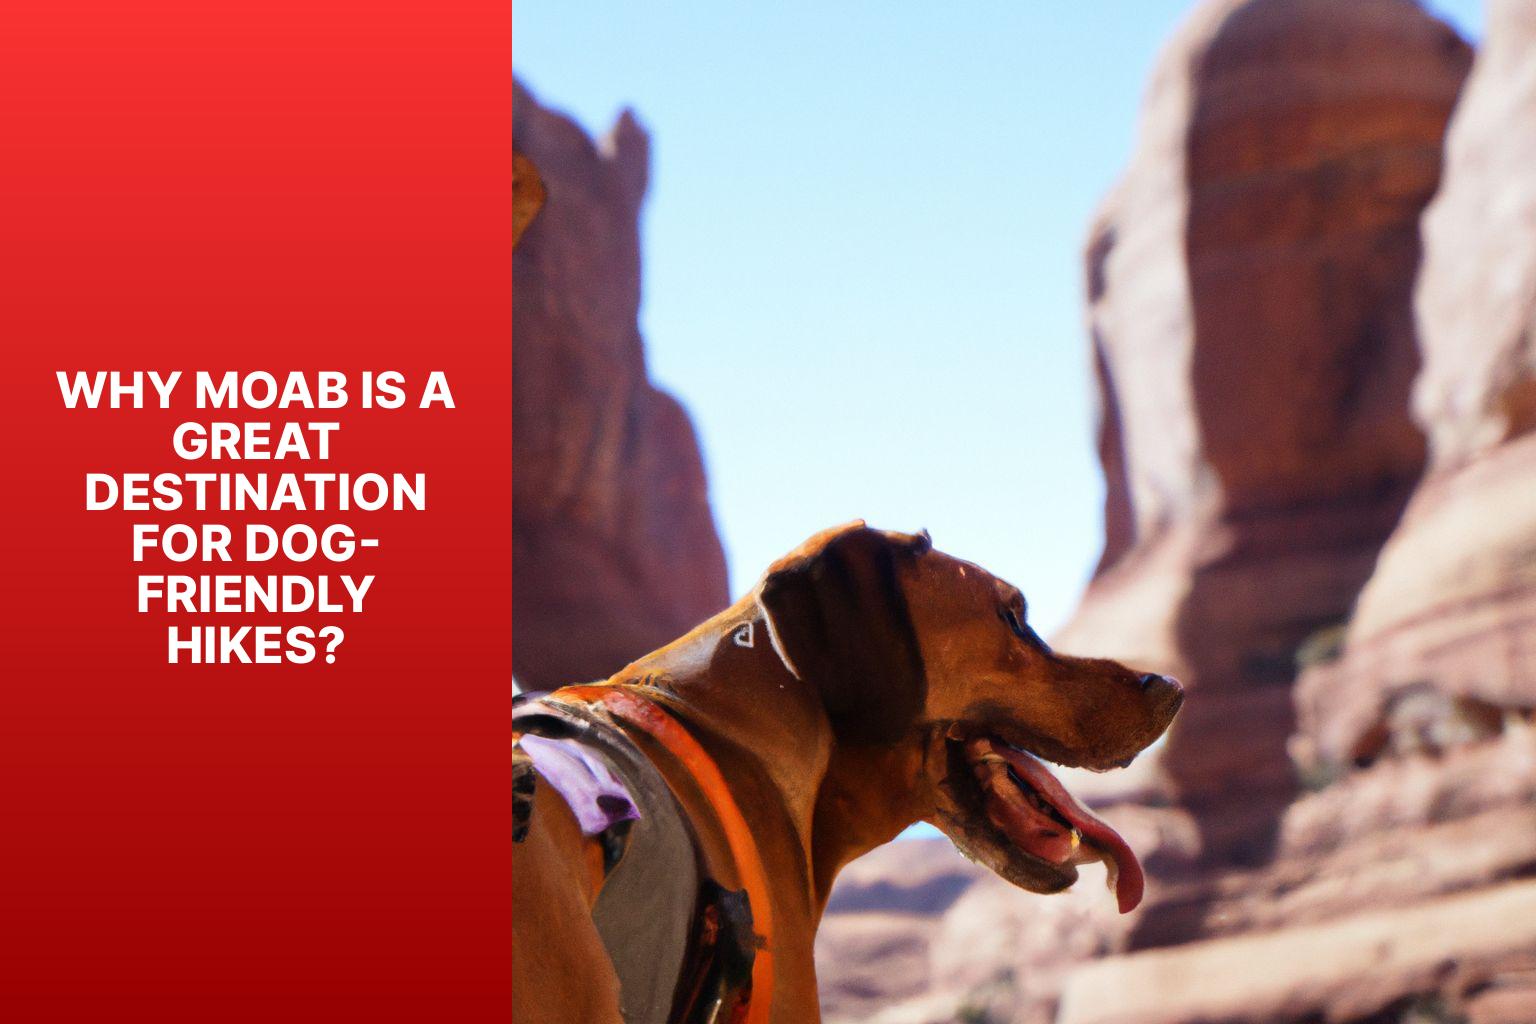 Why Moab is a Great Destination for Dog-Friendly Hikes? - Dog Friendly Hikes in Moab 